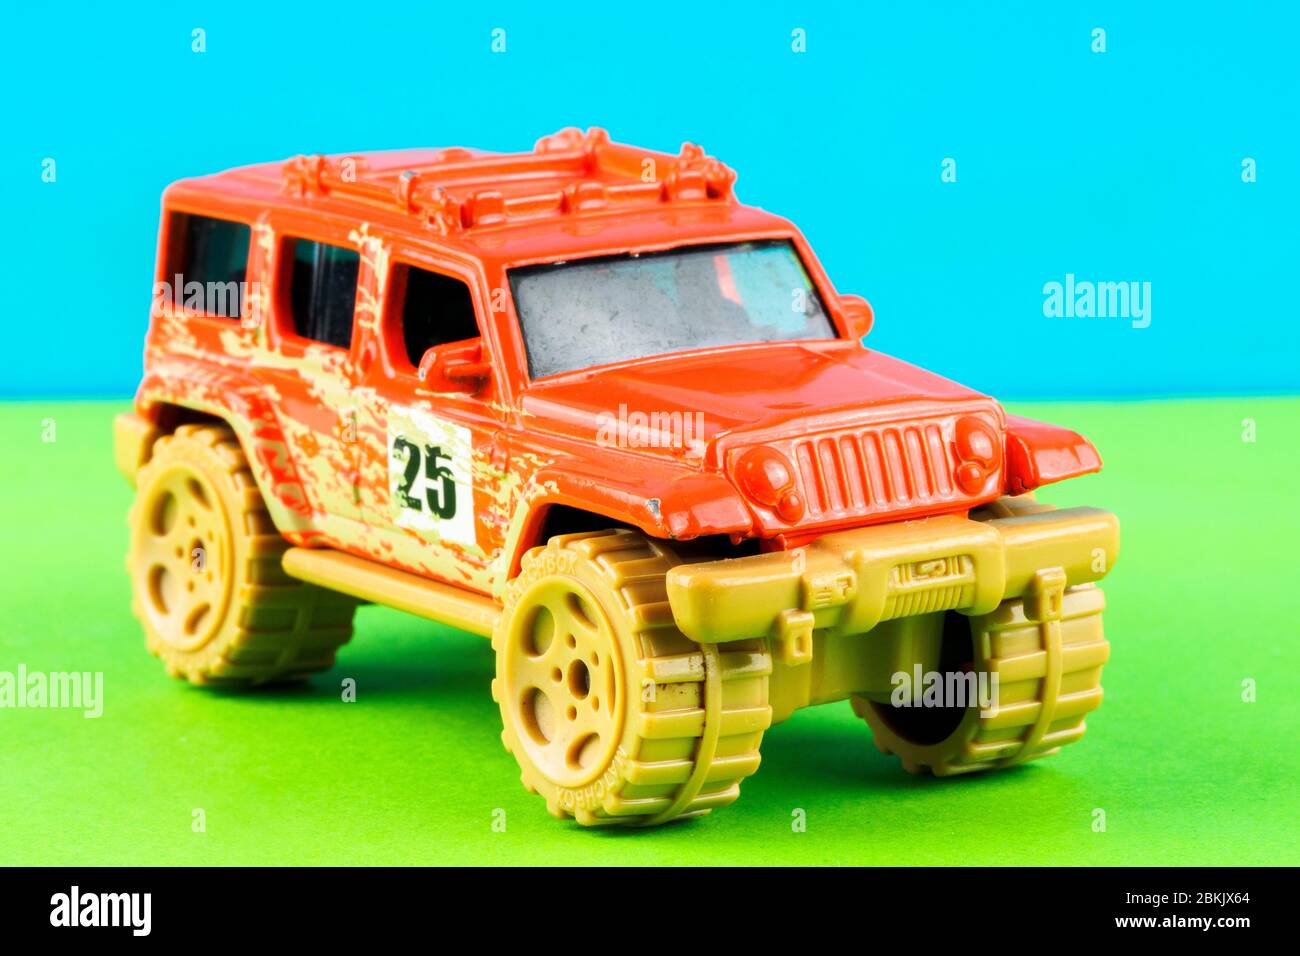 Matchbox Jeep model toy car isolated in white background Stock Photo